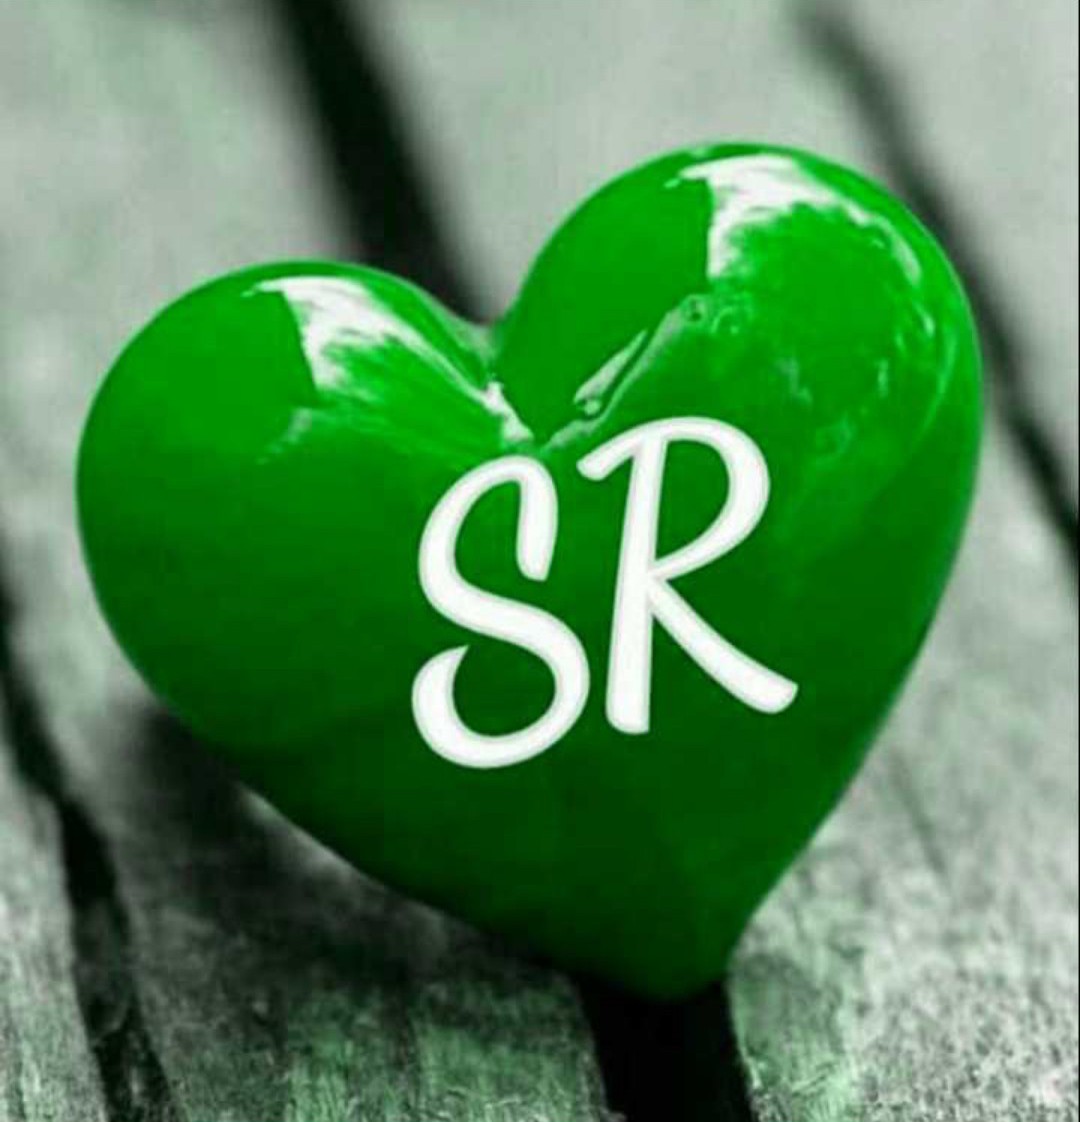 sr love • ShareChat Photos and Videos